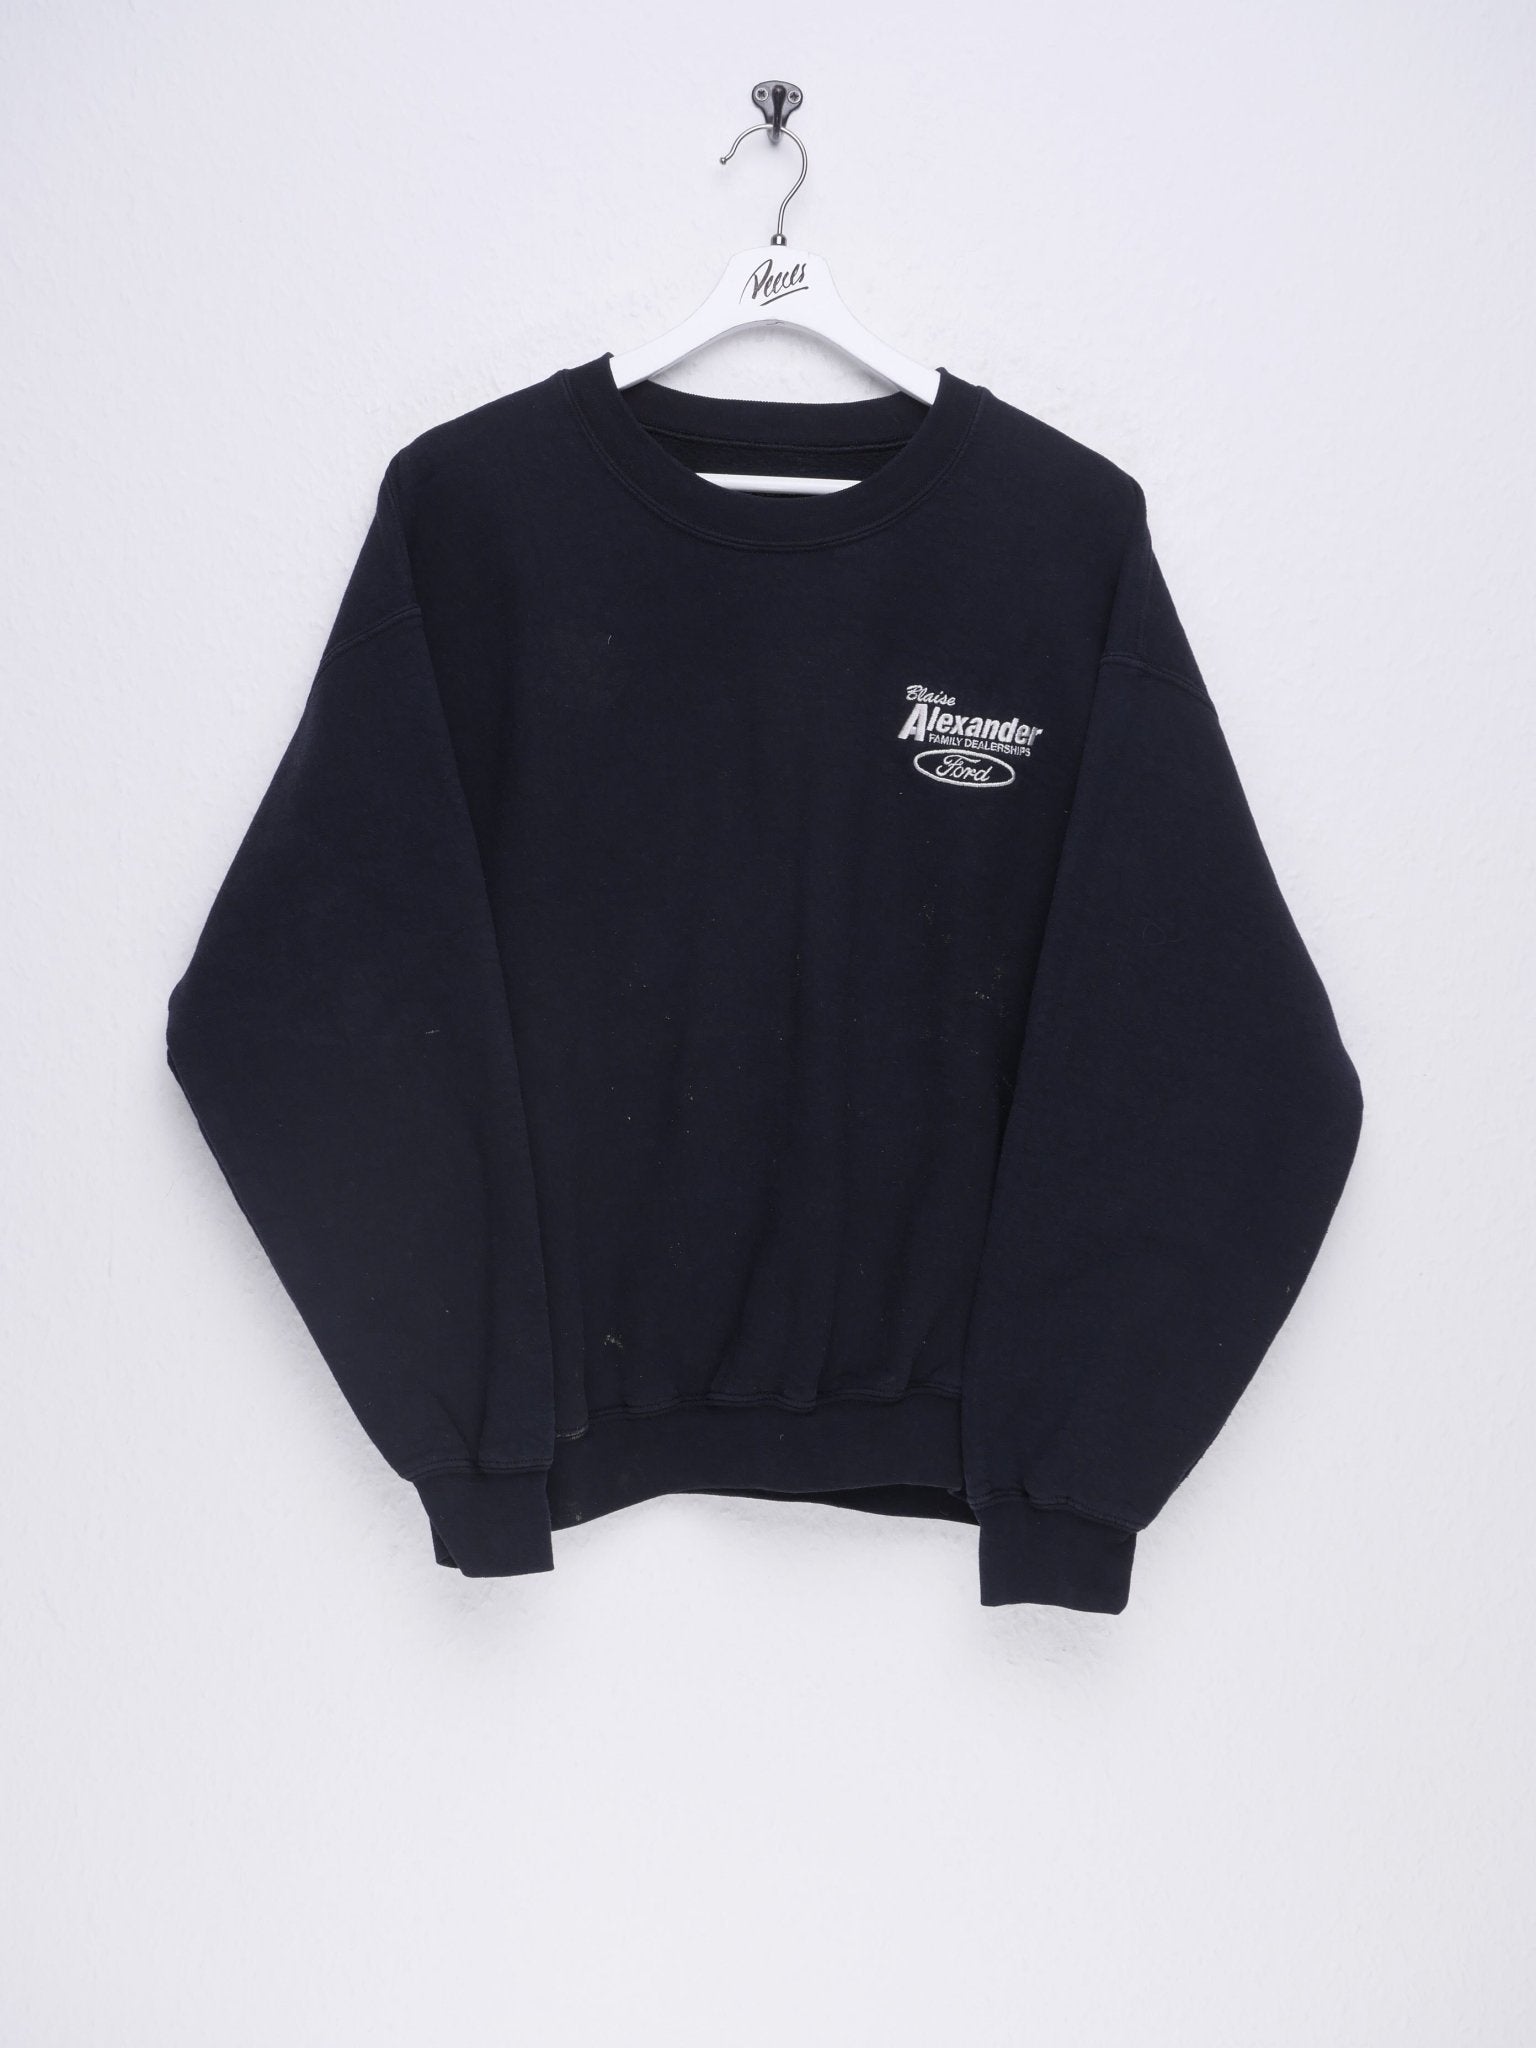 embroidered Ford Logo black Sweater - Peeces